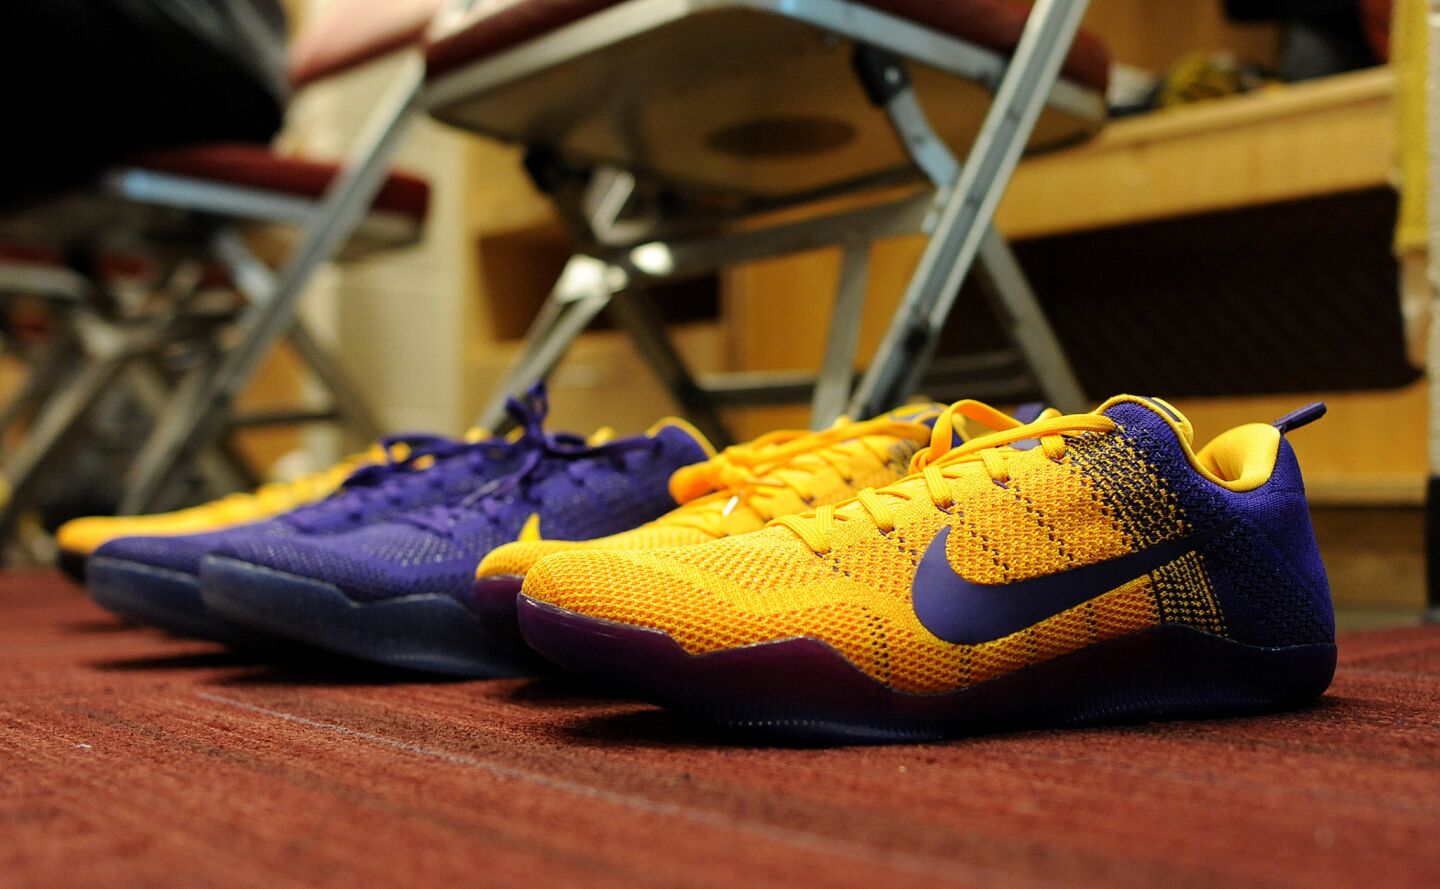 Kobe Bryant's shoes sit in front of his locker before a game against the Rockets in Houston.